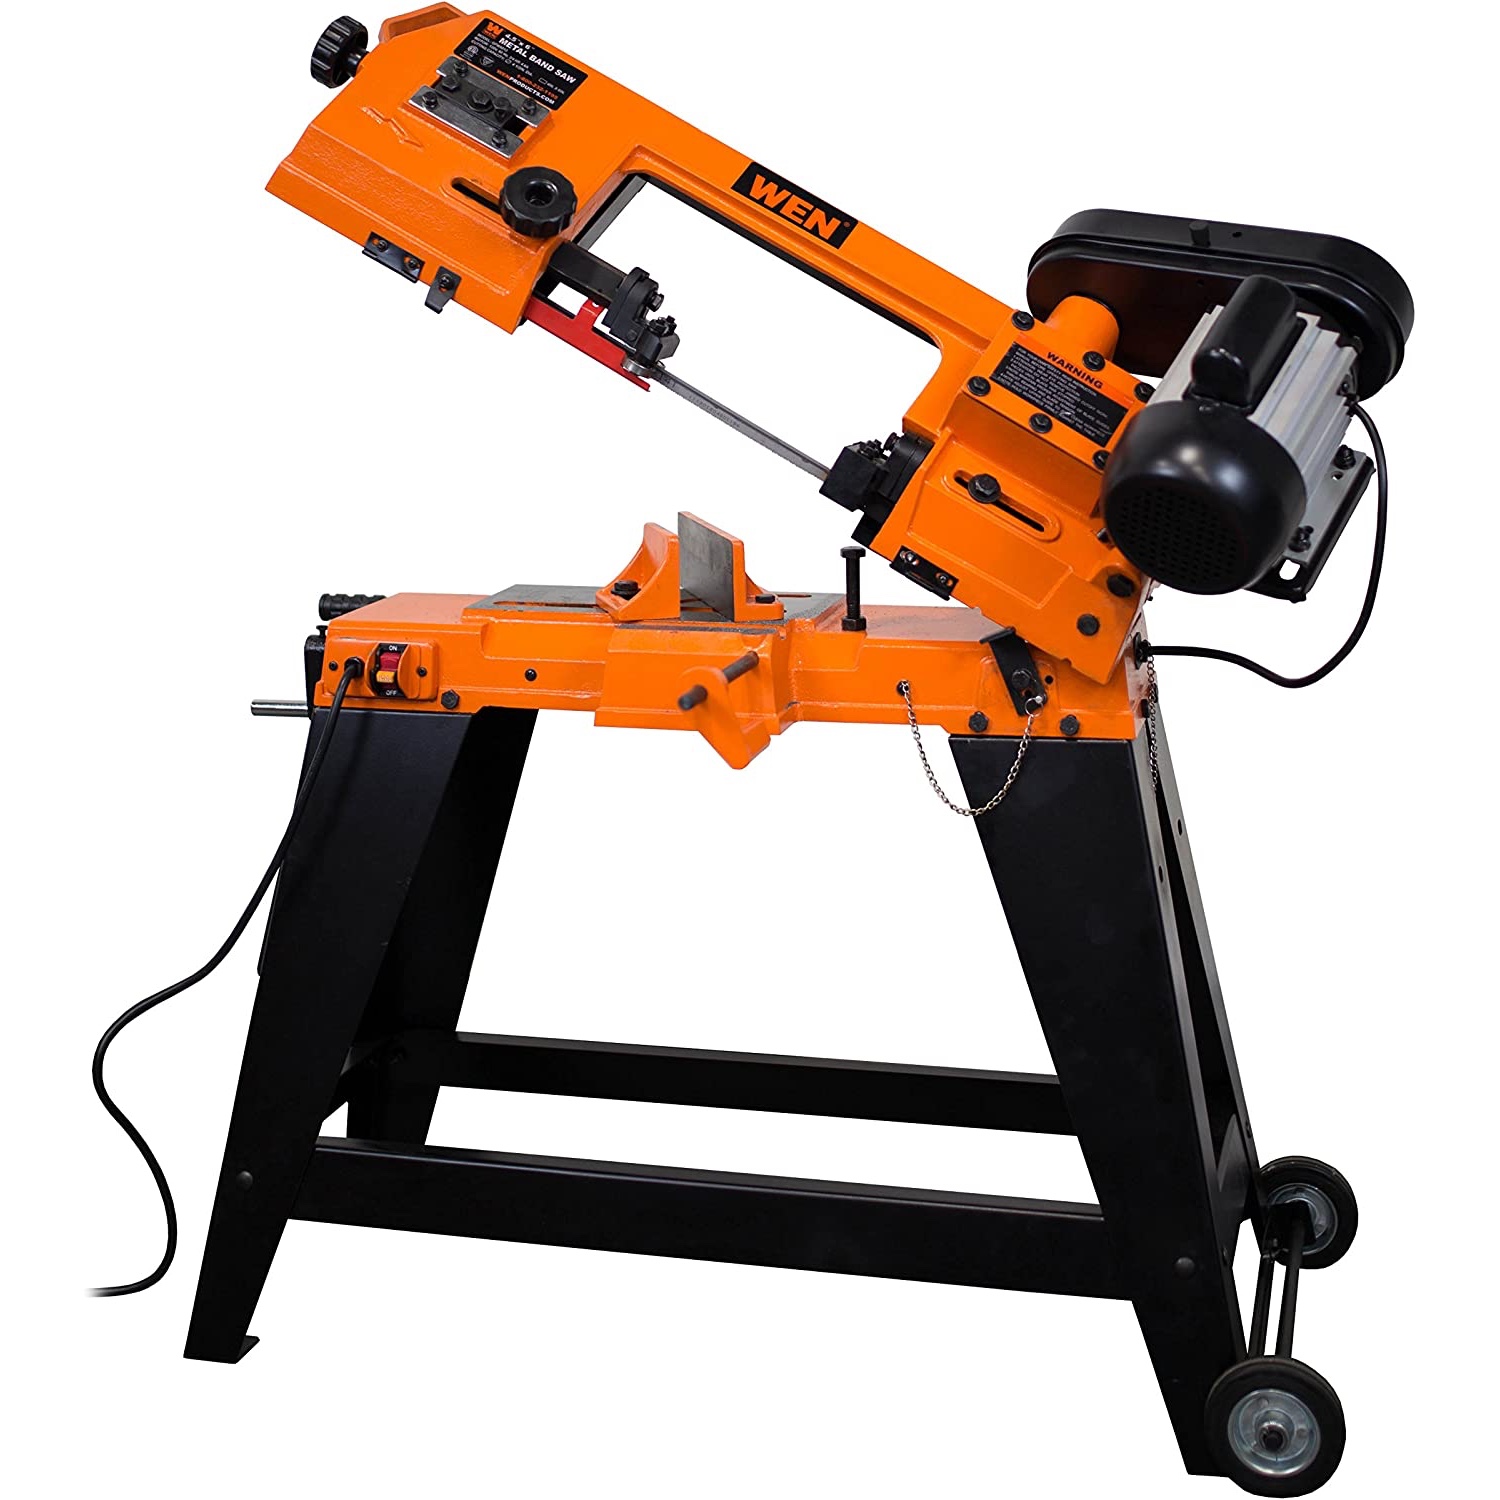 Wen BA4664 Metal-Cutting Band Saw with Stand